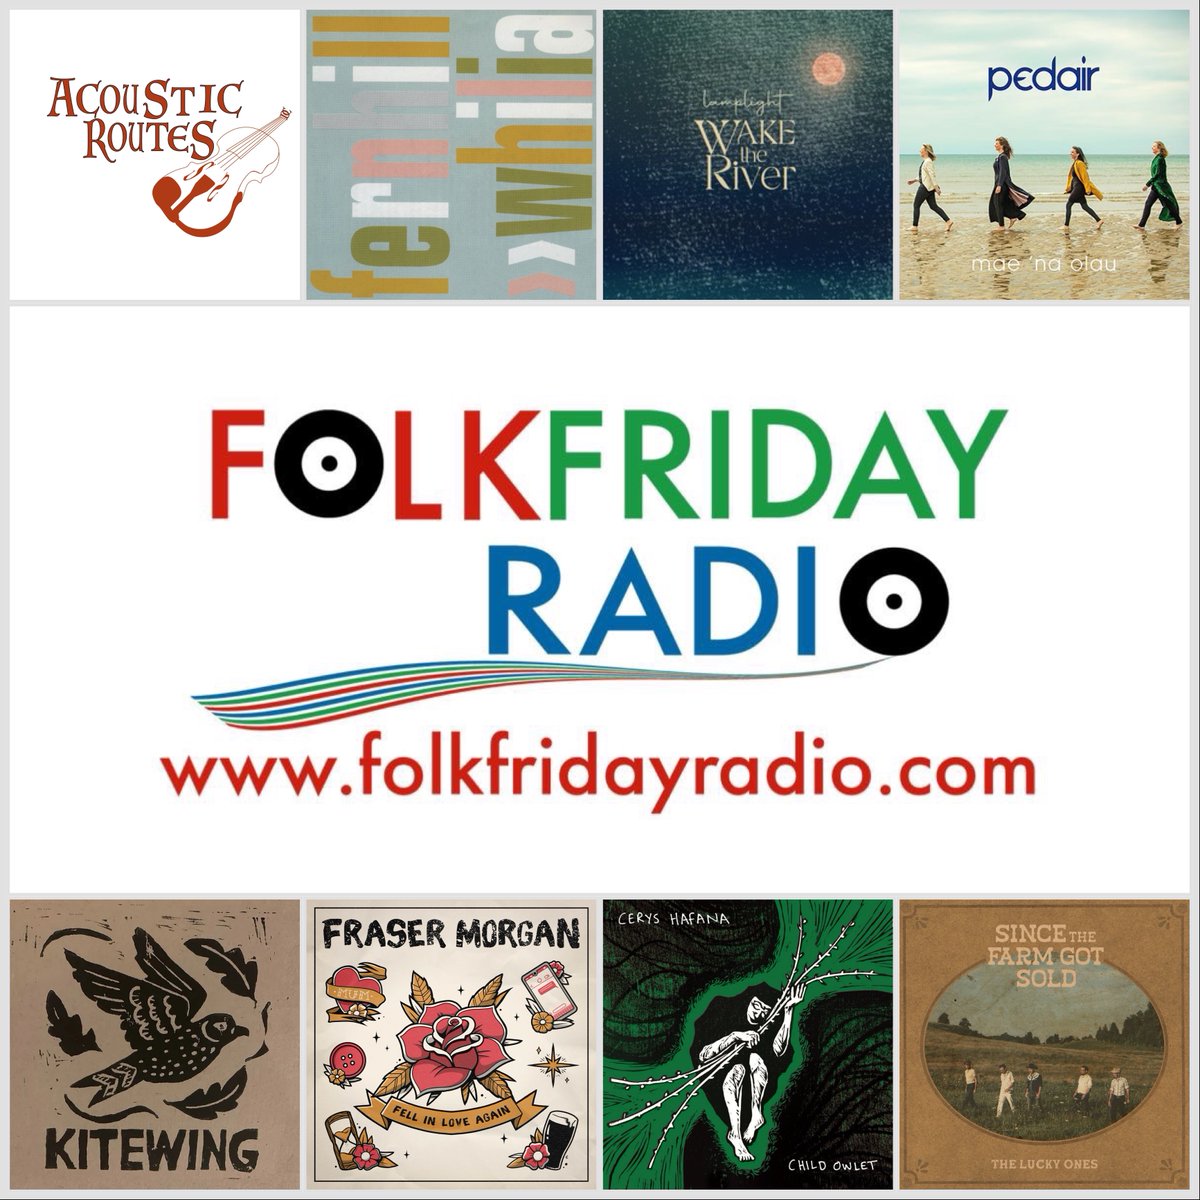 Coming up in @AcousticRoutes show 481 12pm 🏴󠁧󠁢󠁷󠁬󠁳󠁿🇬🇧time today on folkfridayradio.com Featured album from #Kitewing Tracks from @fernhillmusic @waketheriver @andywhite_music @FilkinsDrift @CerysHafana @Bluebyrdband @FraserMorganUK @CosmoGuitar @Pedair4 and more.